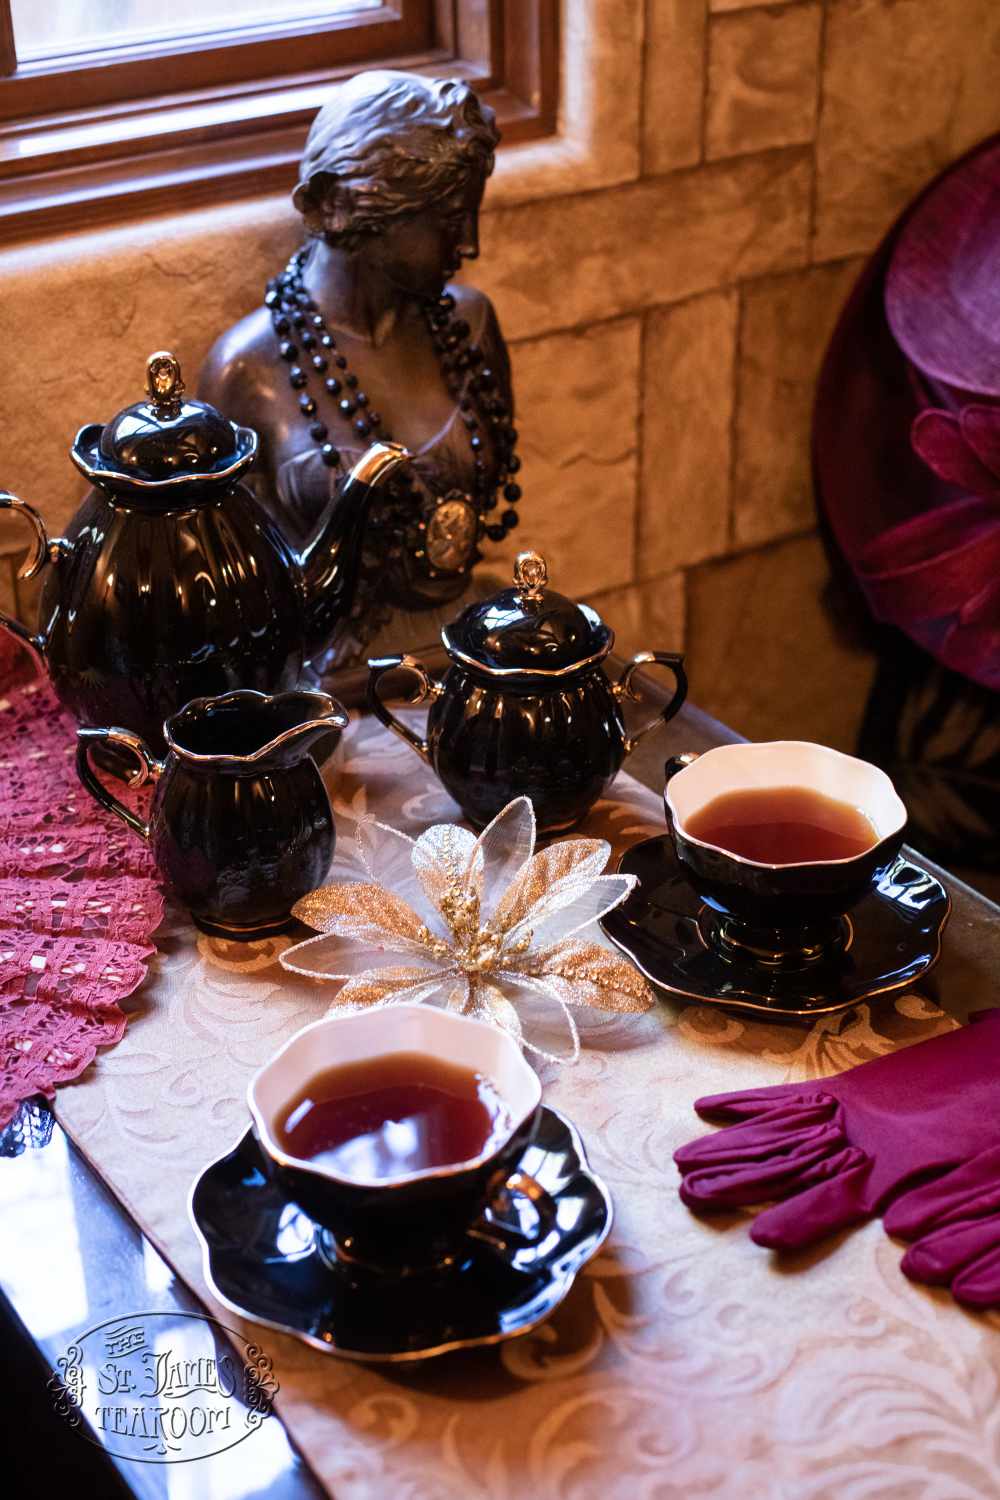 Giftshop Albuquerque St James Market - Black China with Tea and Accessories